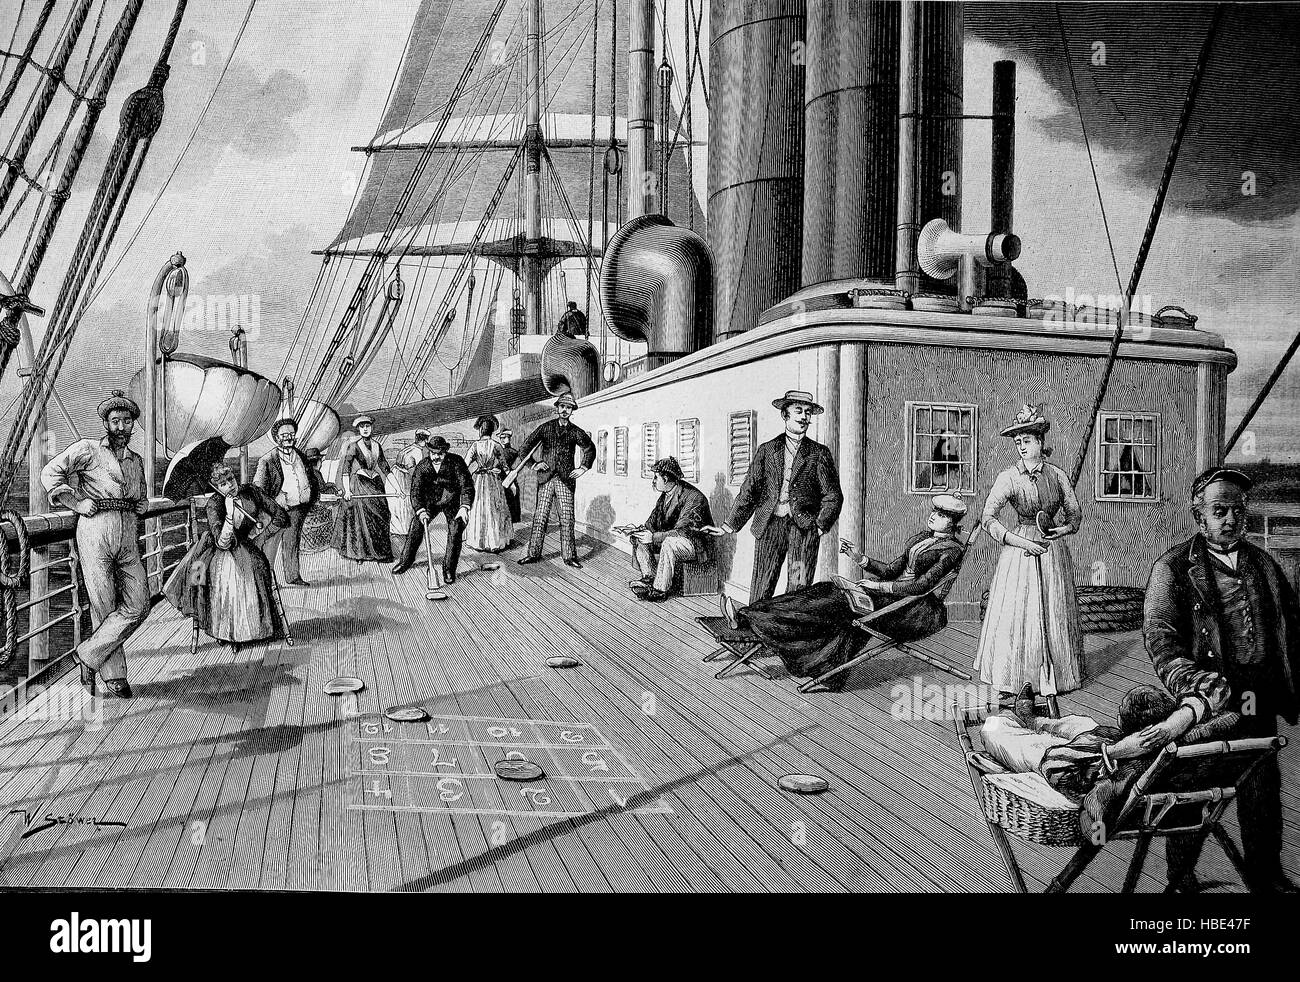 Playing shuffleboard on deck of a transatlantic steamer, illustration, woodcut from 1880 Stock Photo